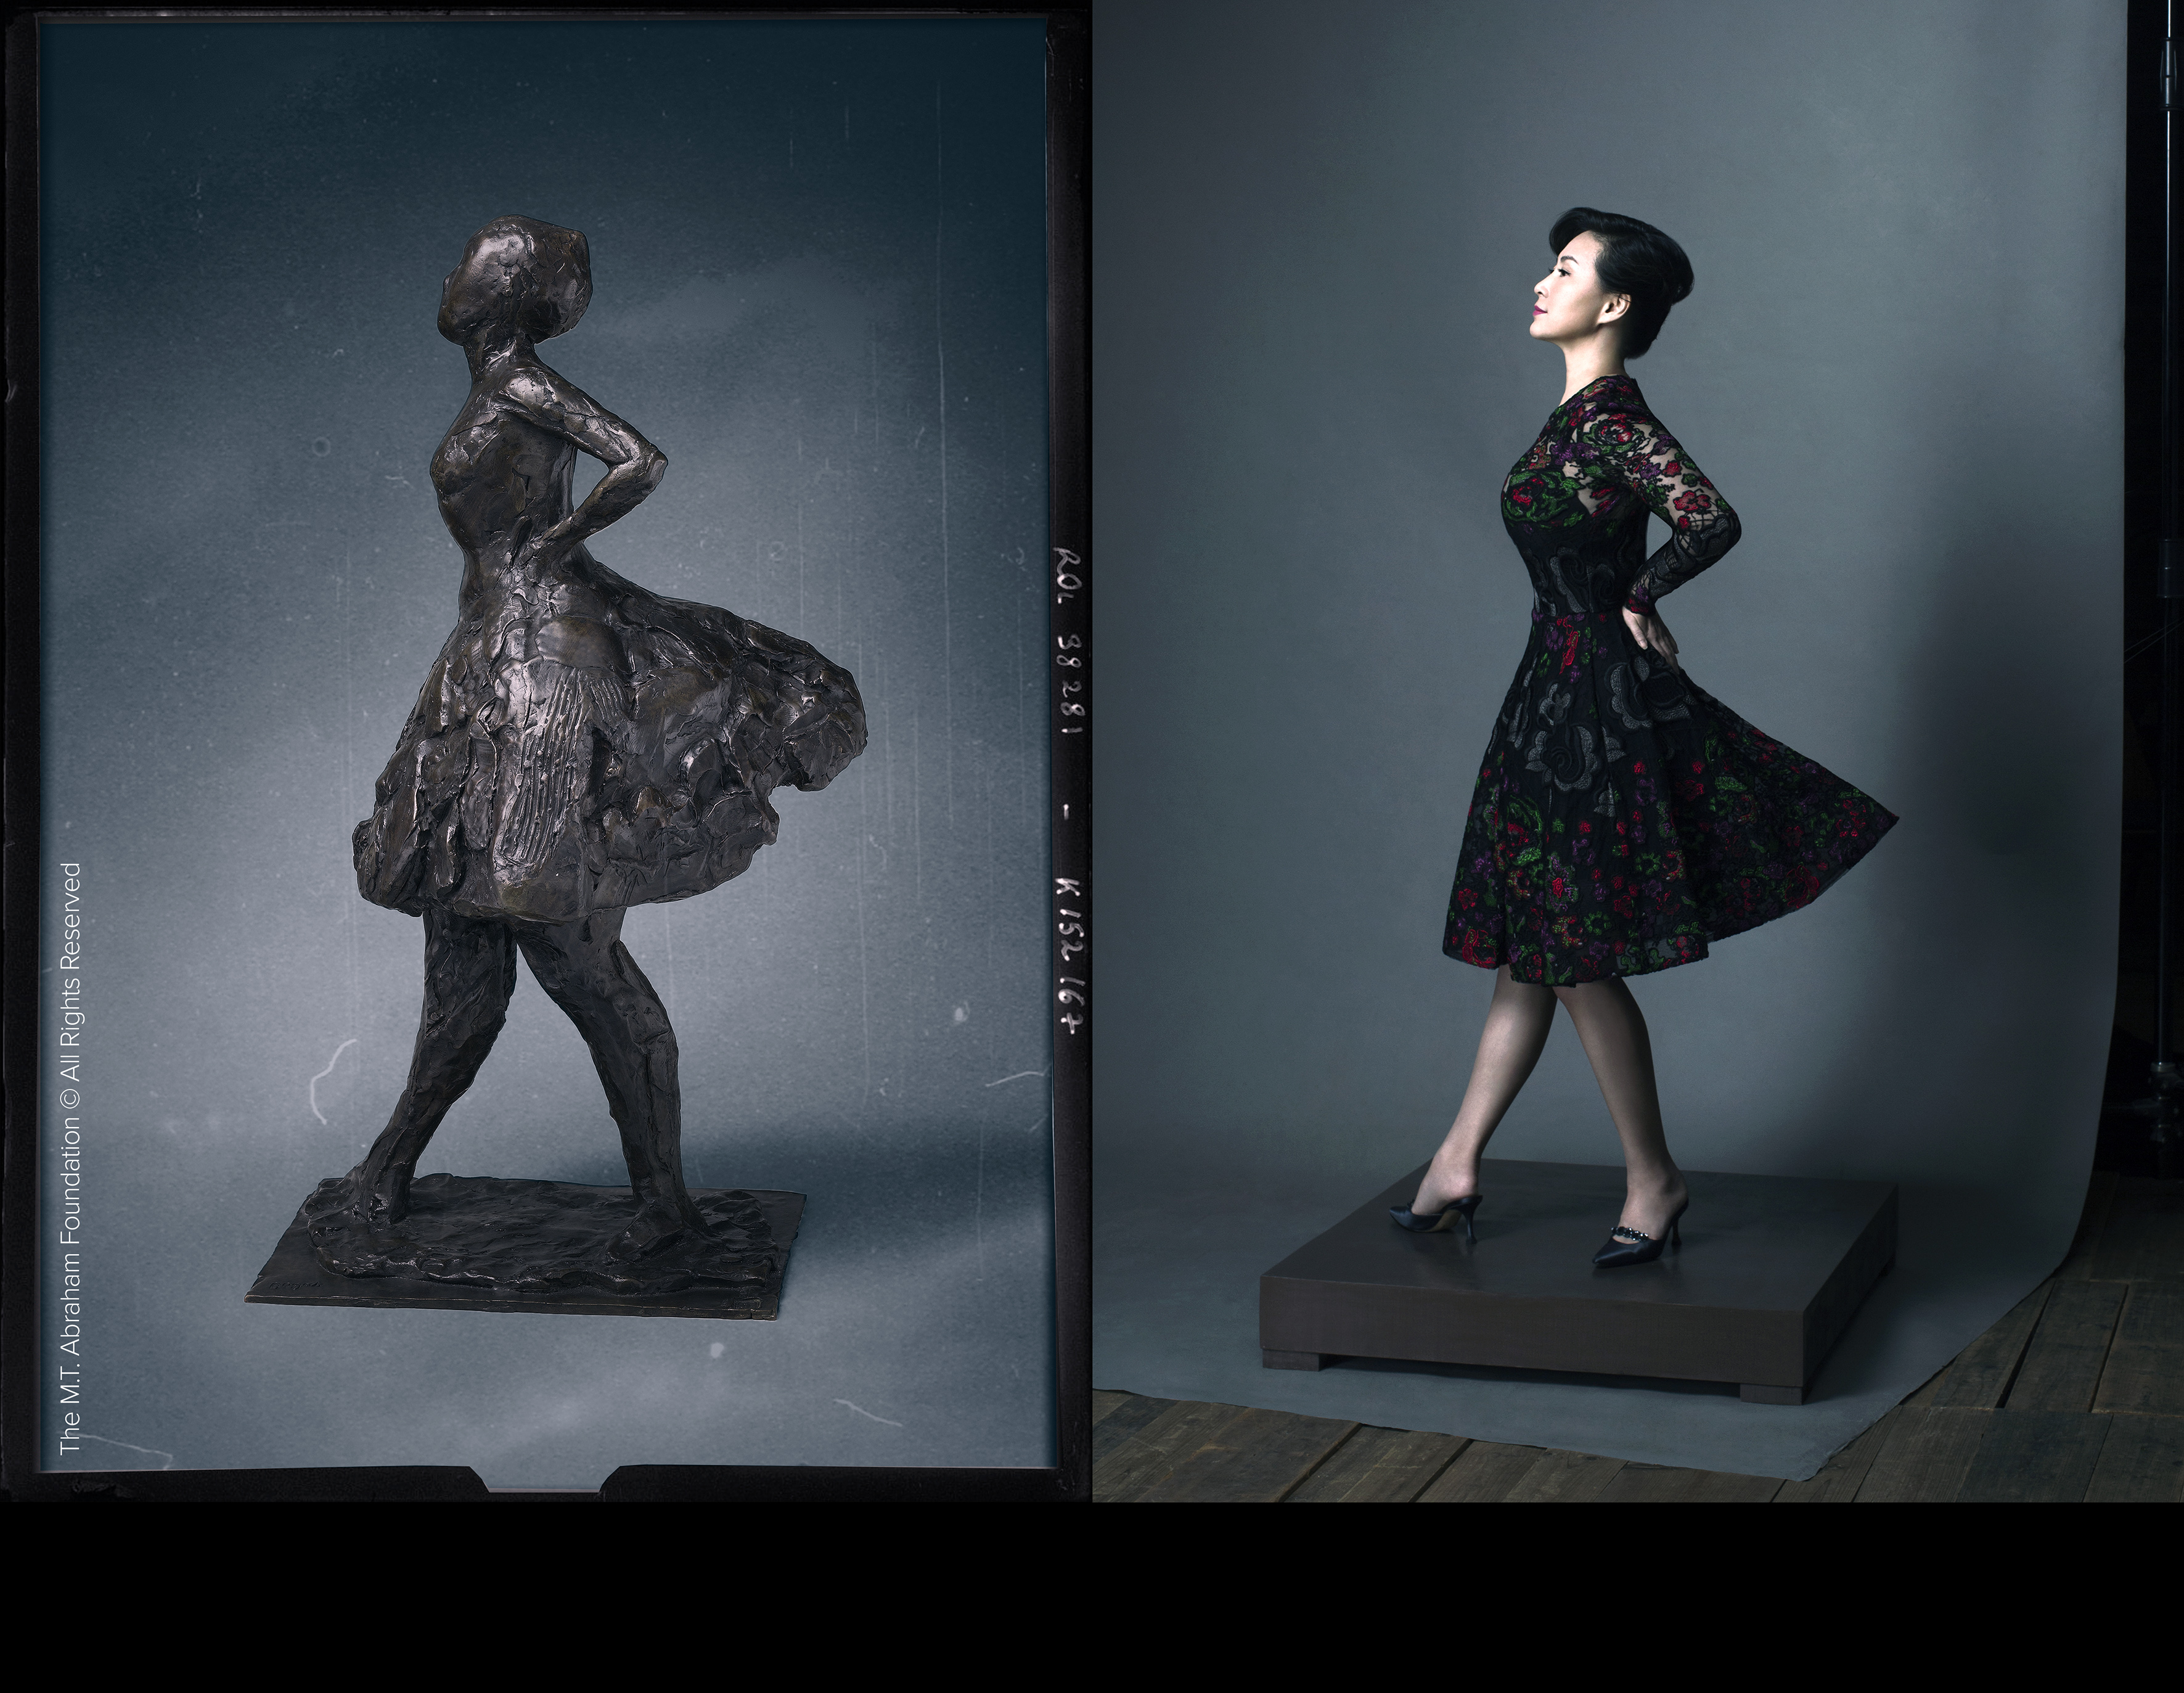 Pansy Ho, co-chairperson of MGM China, strikes a pose for the photo campaign, a tribute to a current exhibition celebrating a rare collection of sculptures by French artist Edgar Degas. 